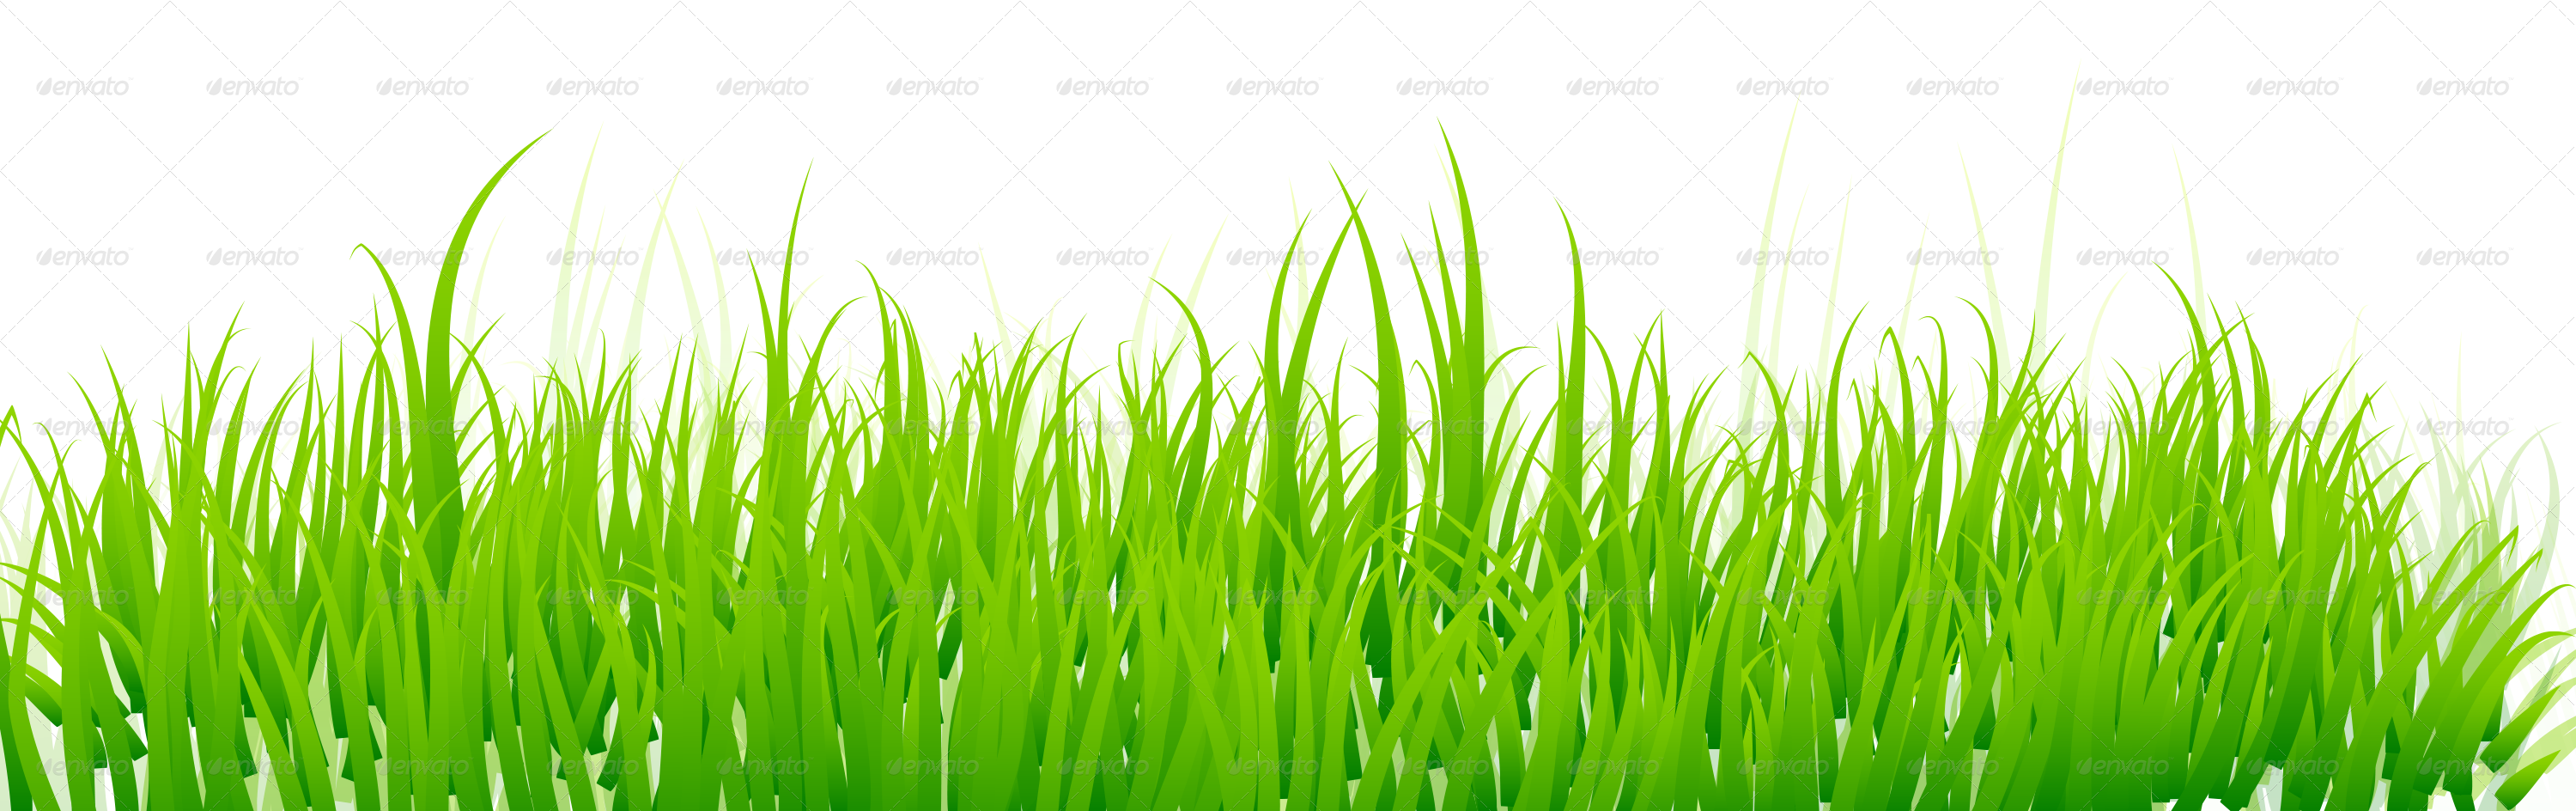 Grass images pictures clip ar